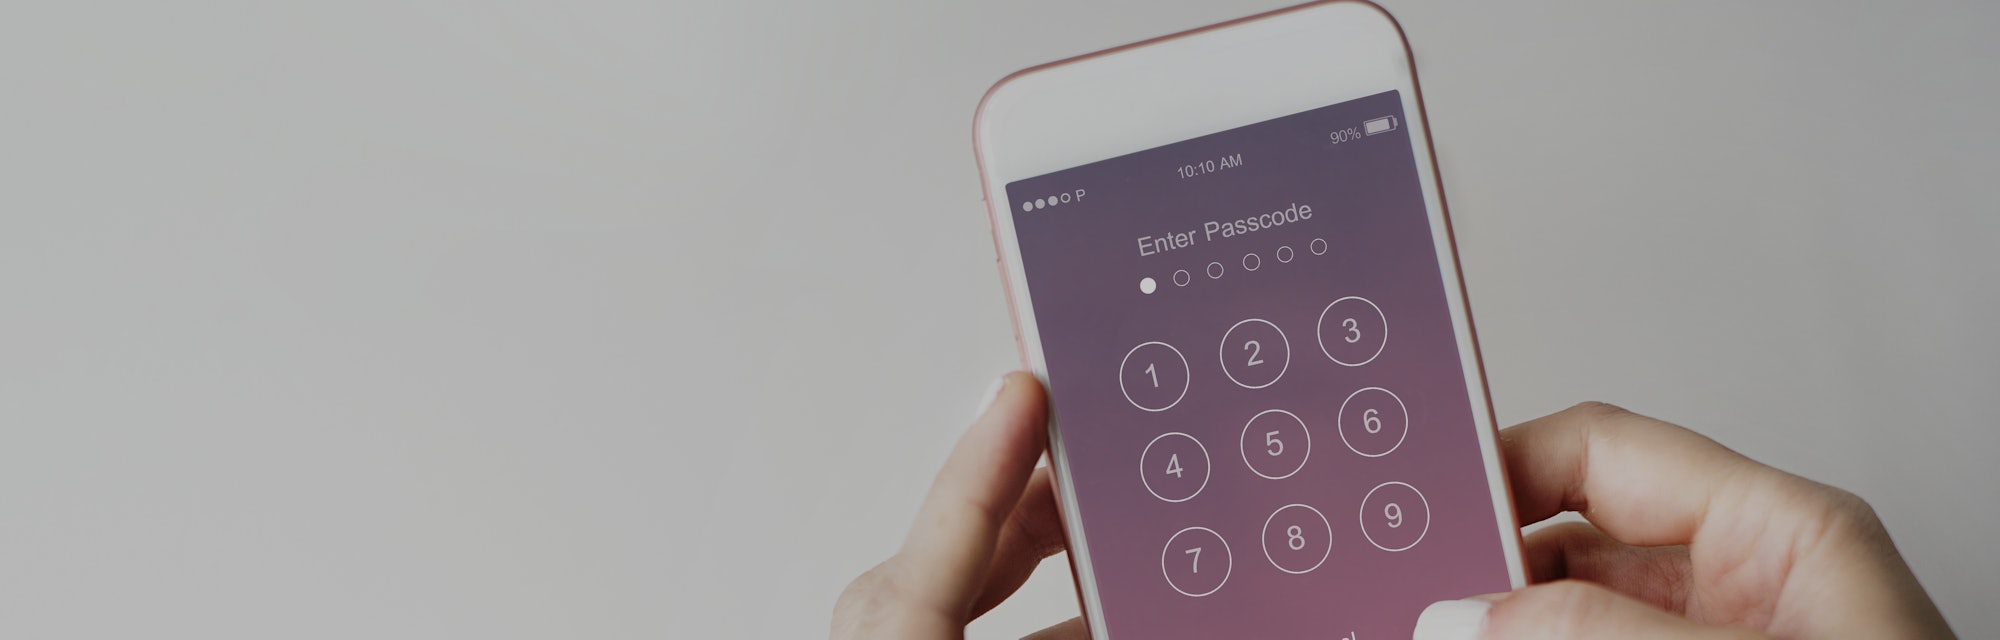 Enter Passcode Security System Concept